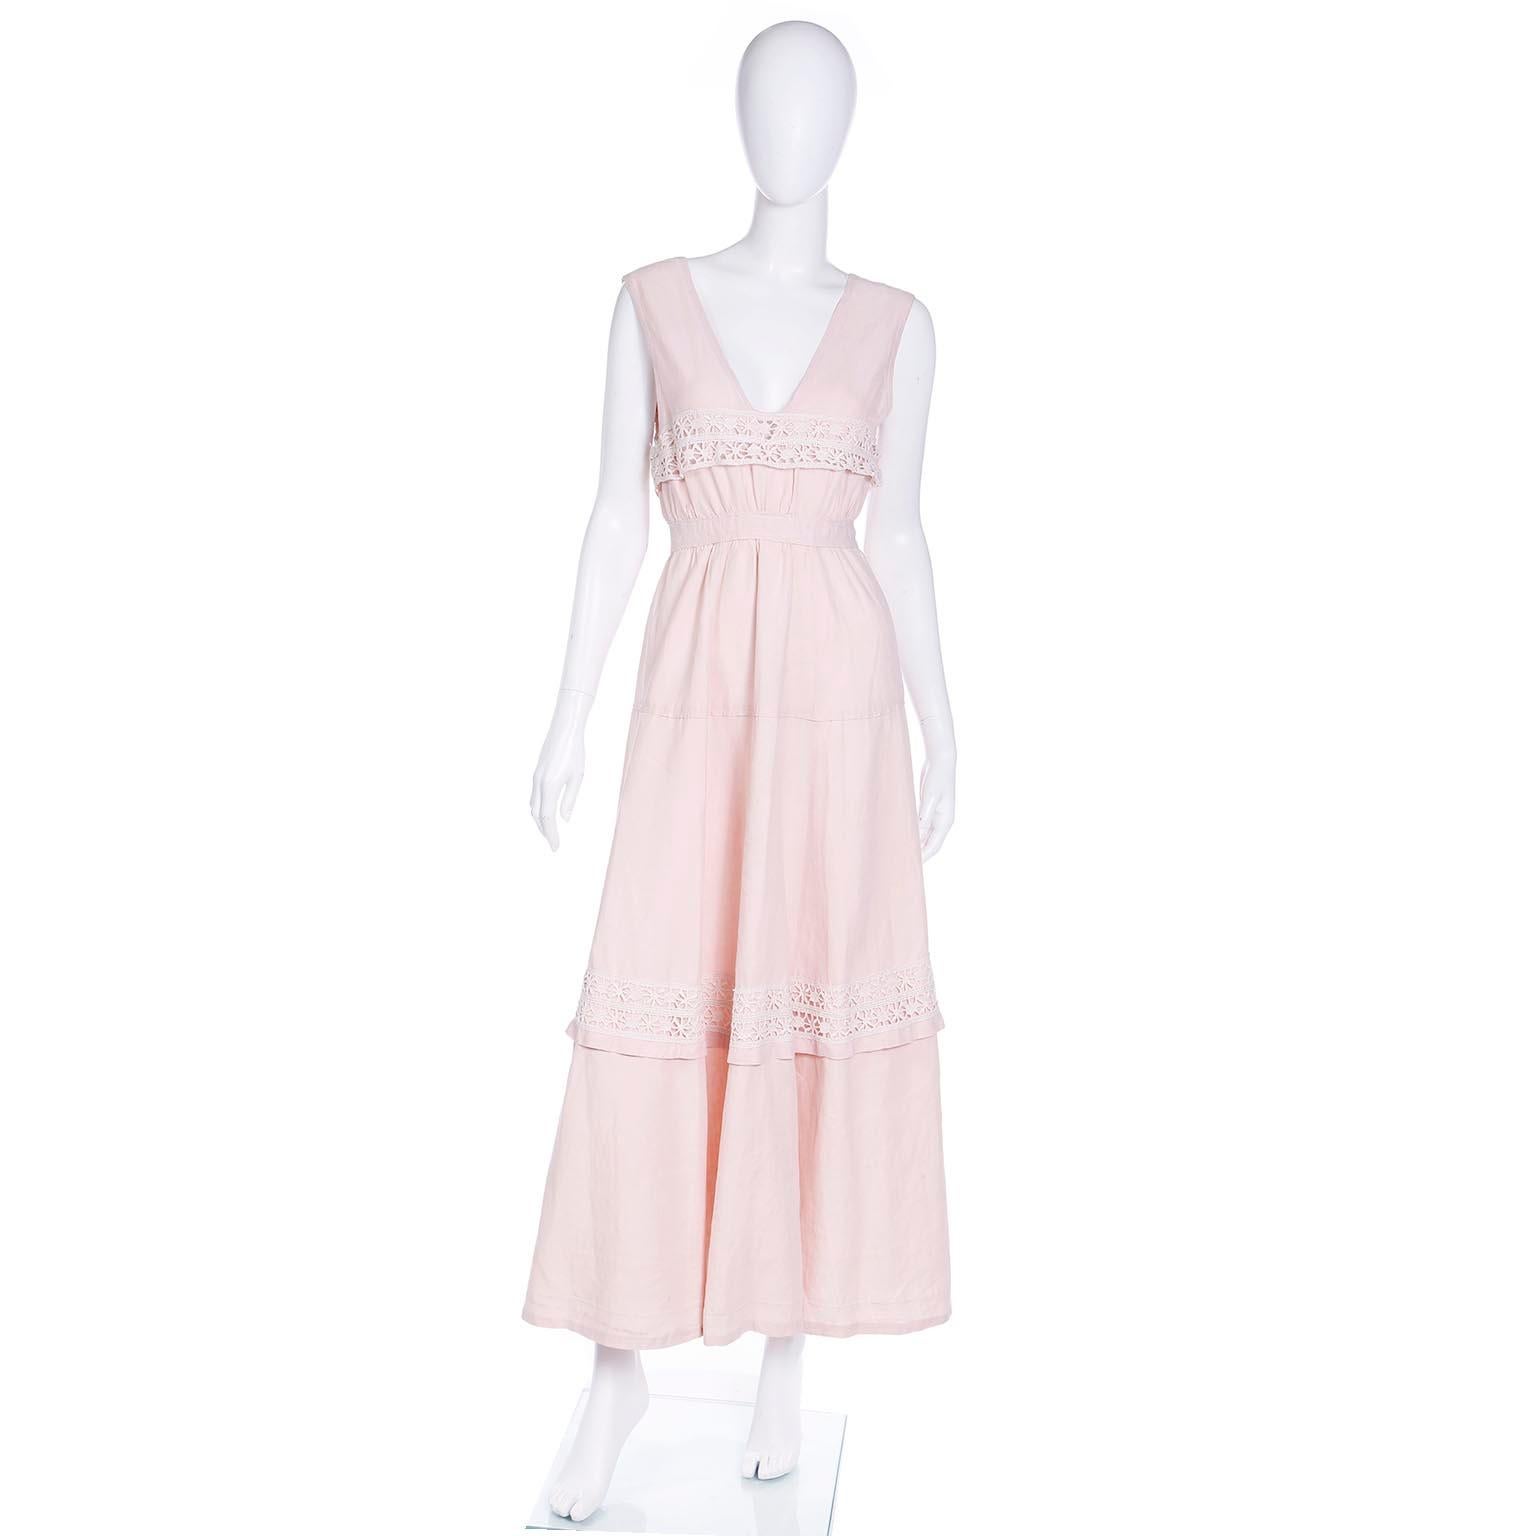 We love the Victorian and Edwardian era lawn dresses and this one is so wearable today! This beautiful medium weight pink linen, or cotton linen blend, full length lawn dress would have originally been worn with a blouse underneath. The dress has